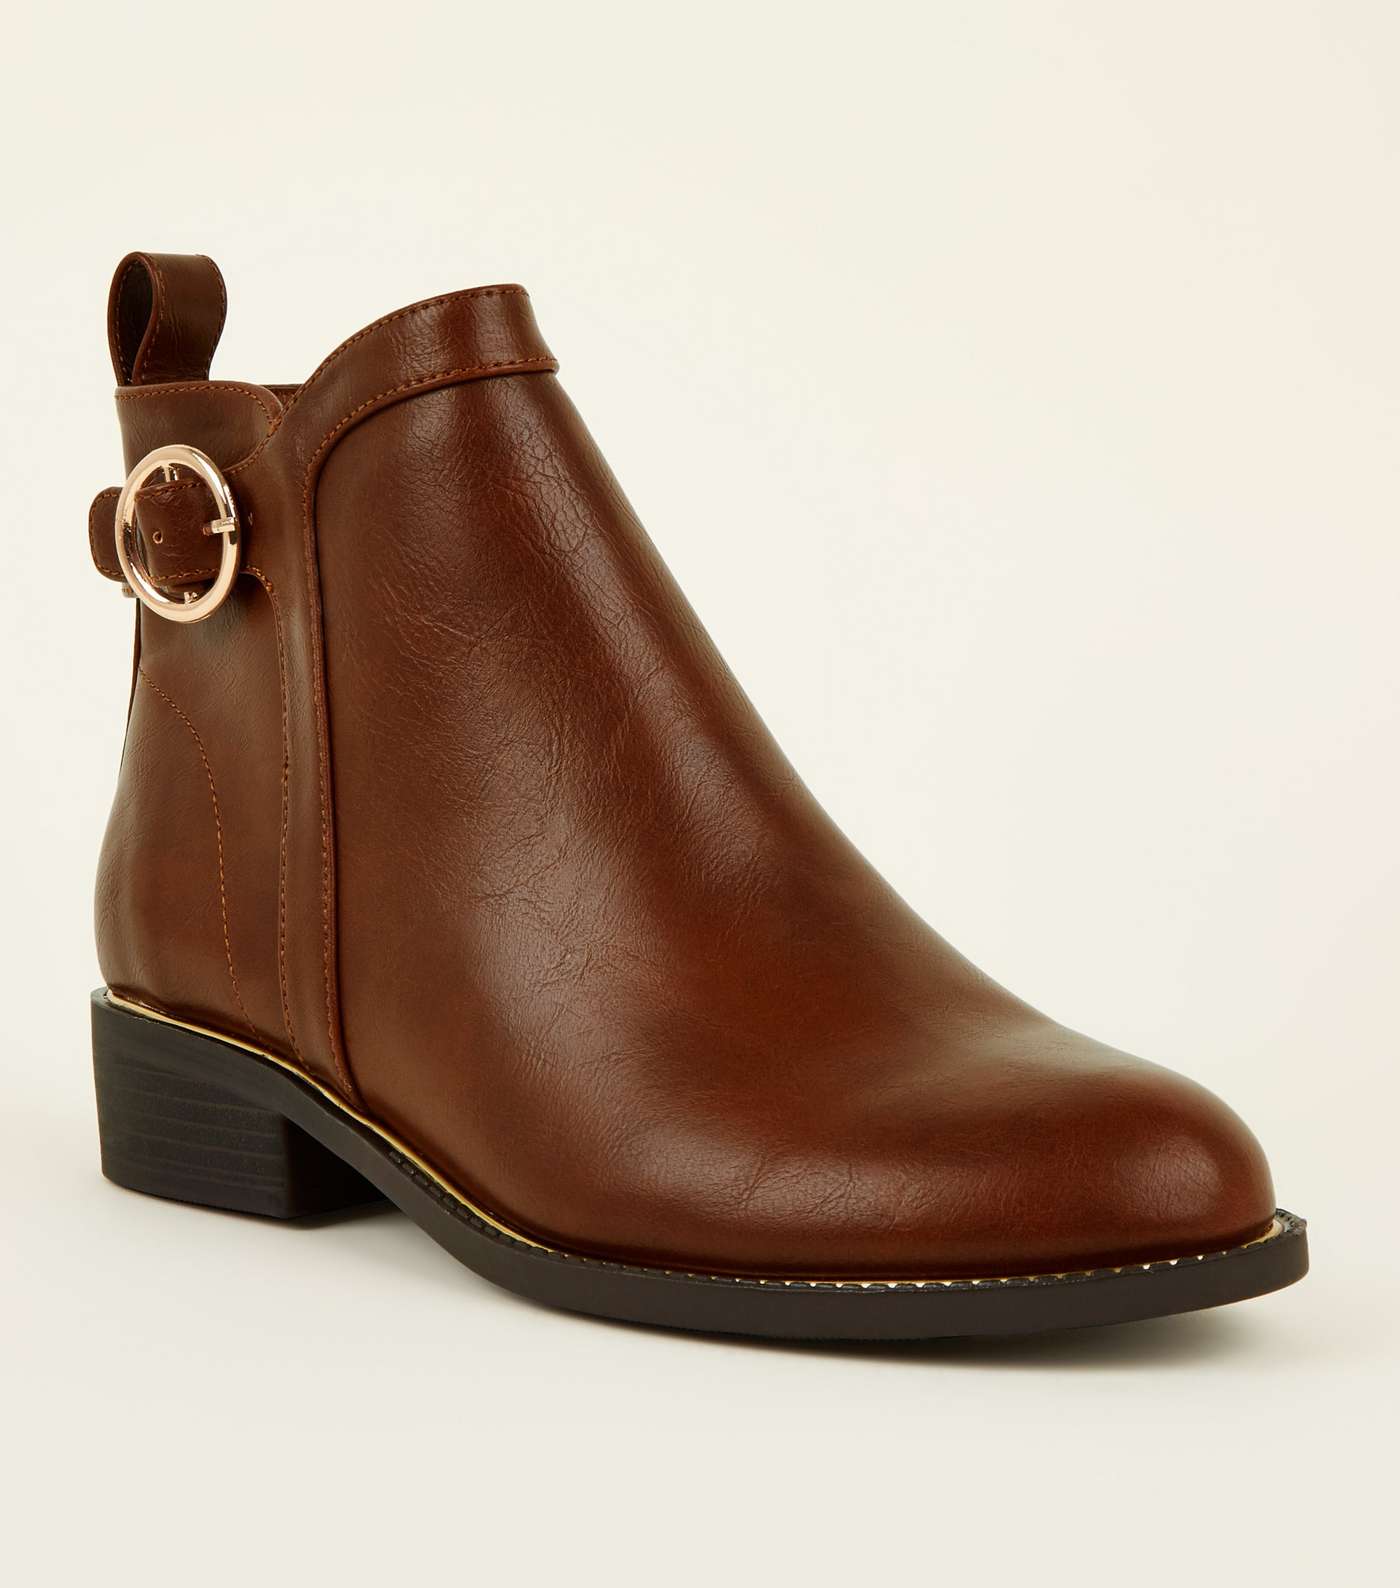 Girls Tan Leather-Look Ring Strap Ankle Boots